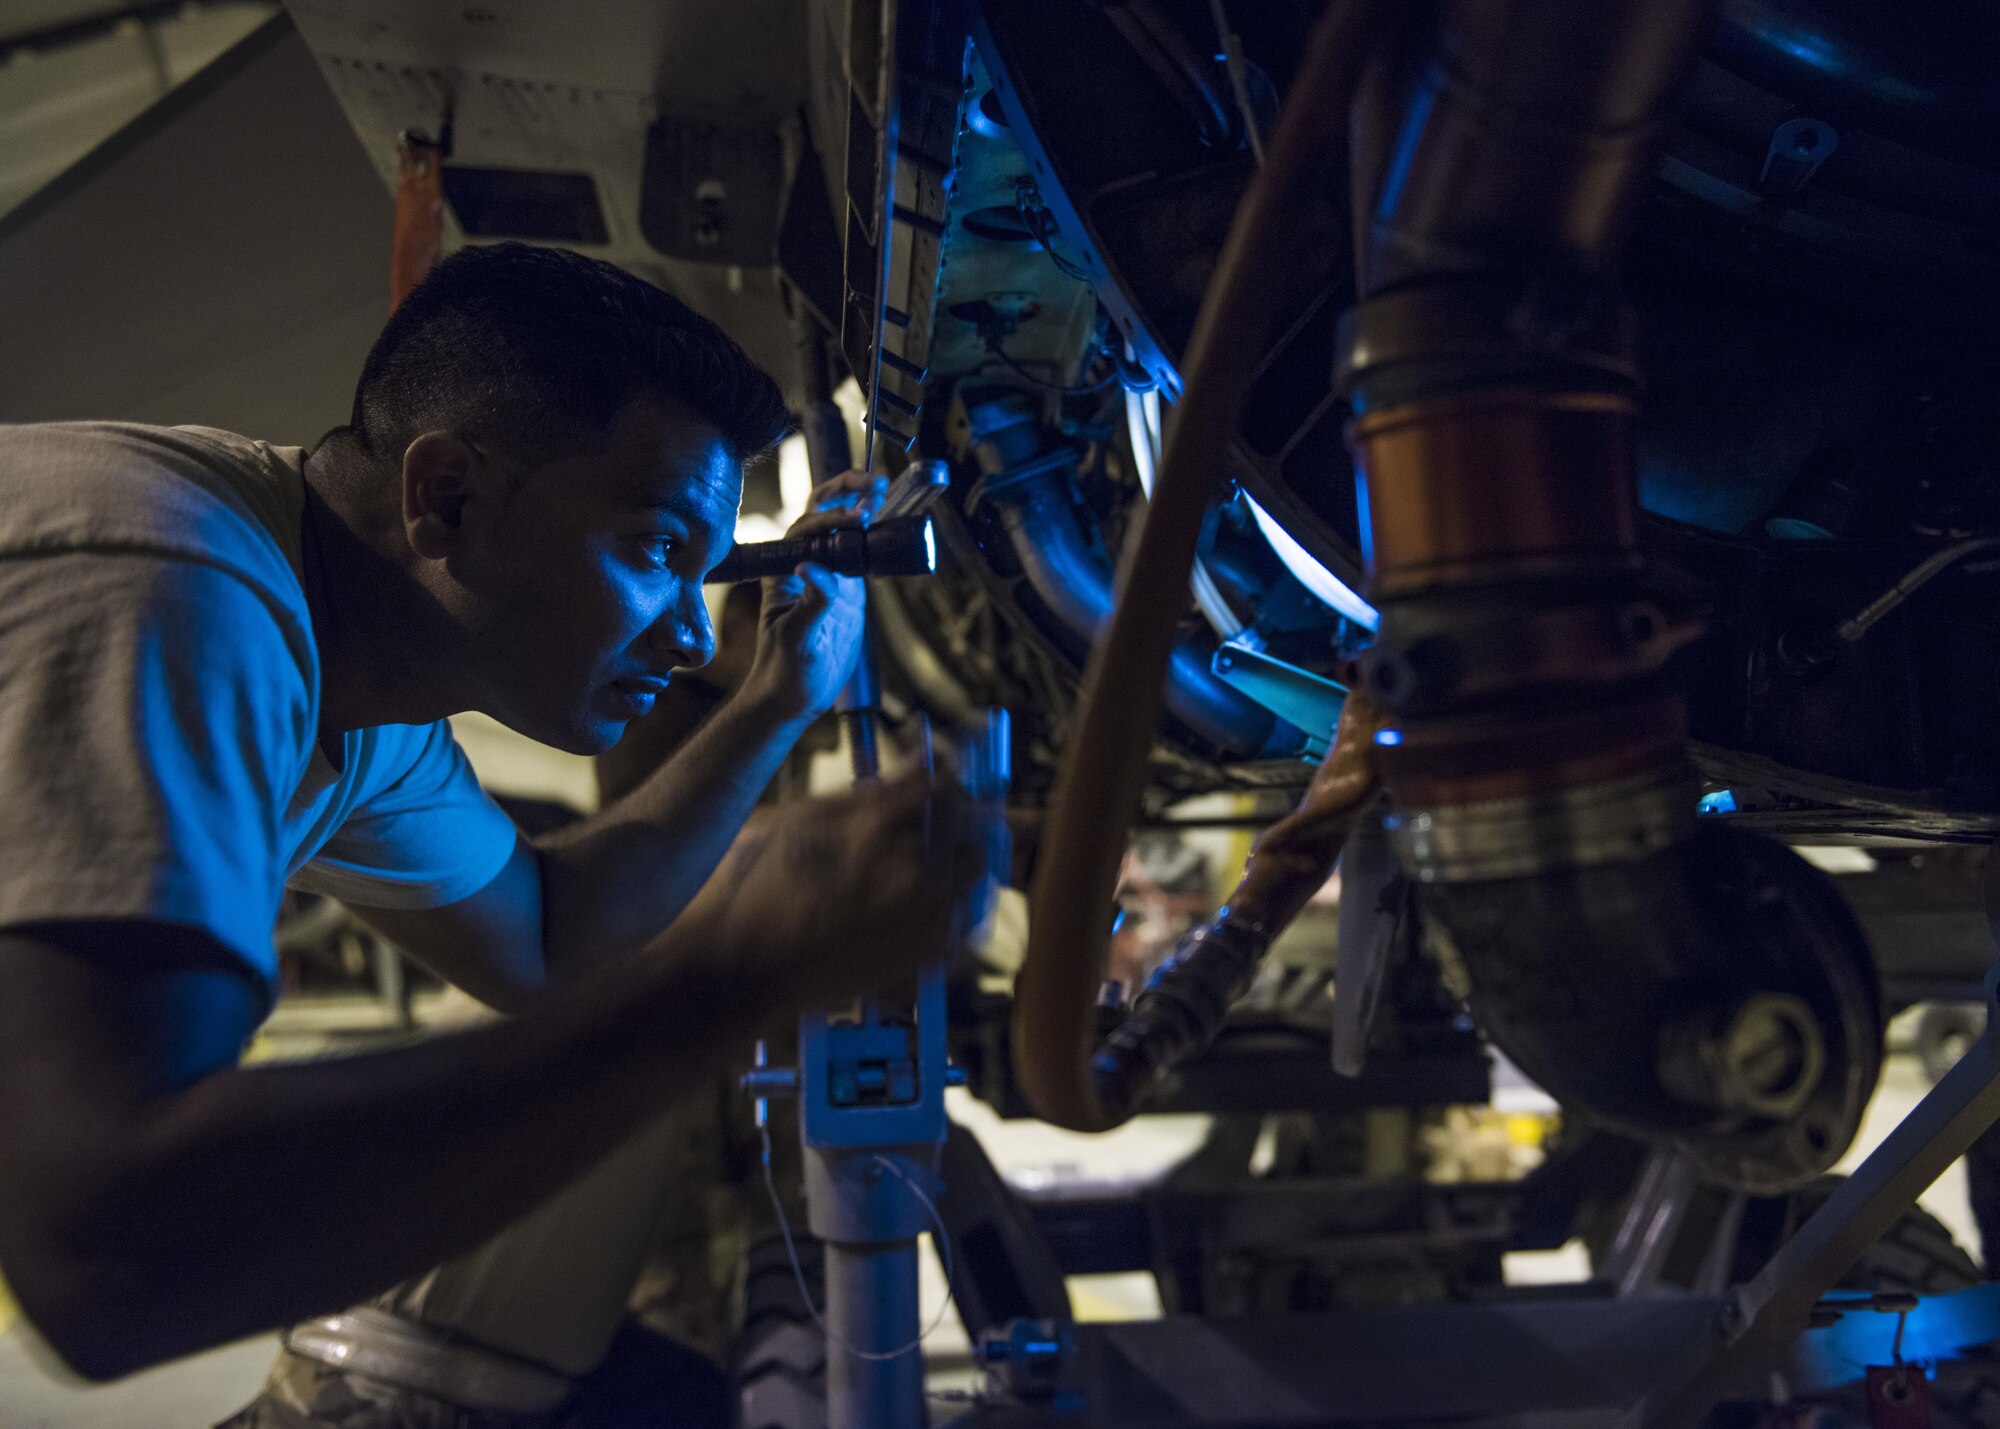 Tech. Sgt. Brijesh Seepersab, 455th Expeditionary Aircraft Maintenance Squadron F-16C Fighting Falcon crew chief, installs an engine on an F-16C Fighting Falcon, Bagram Airfield, Afghanistan, Aug. 9, 2016. During installation, crew chiefs carefully guide the engine into place, making sure it is aligned properly and not hitting electrical wires. (U.S. Air Force photo by Senior Airman Justyn M. Freeman)